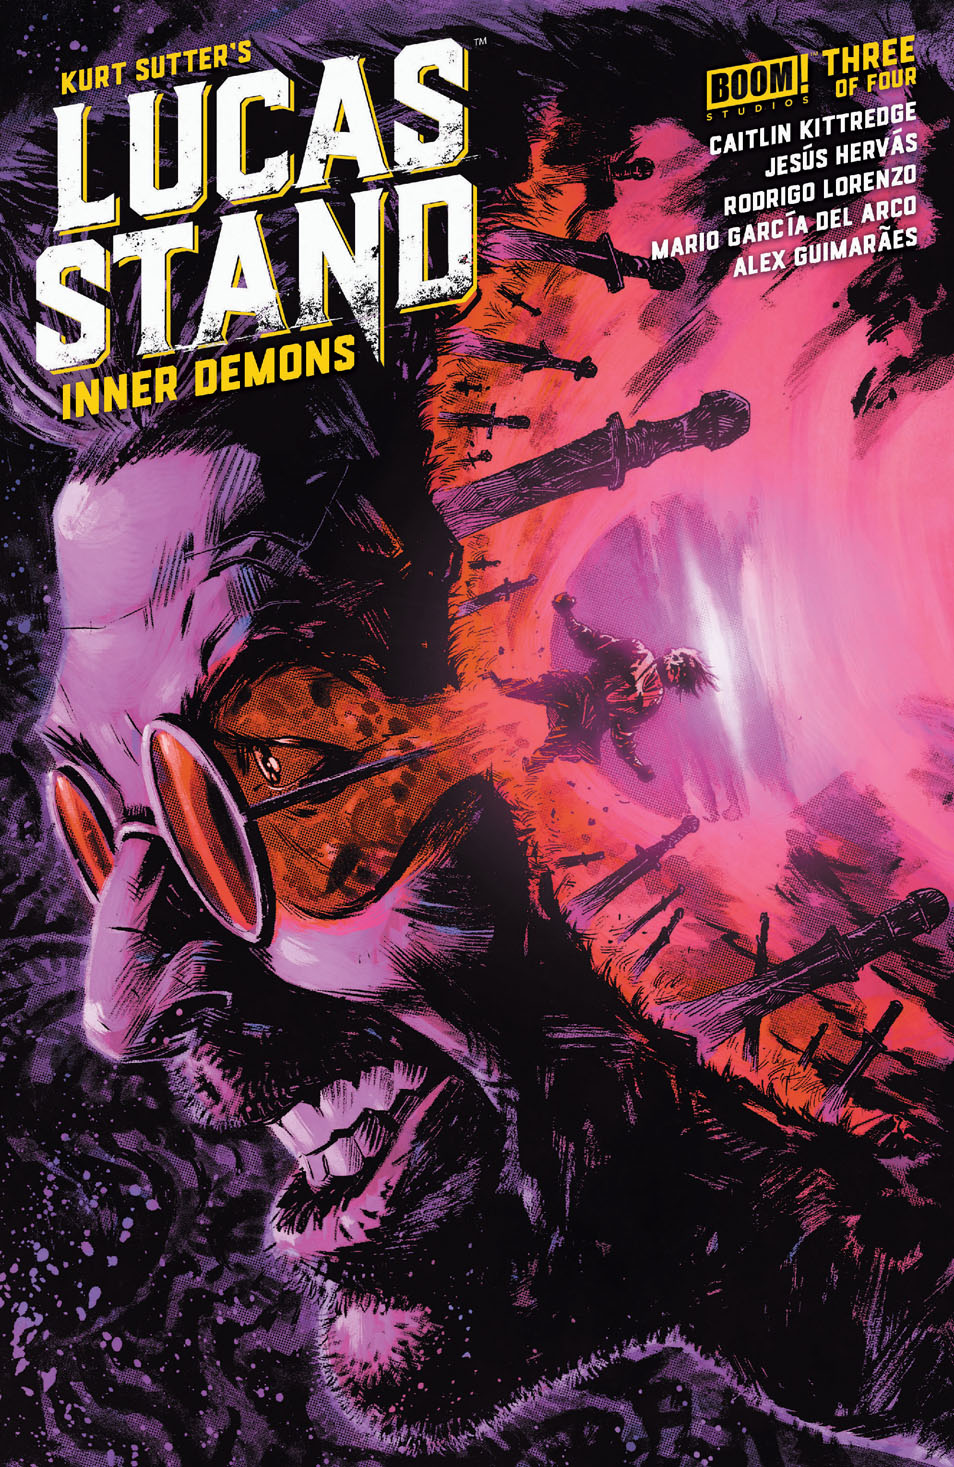 This image is the cover for the book Lucas Stand: Inner Demons #3, Lucas Stand: Inner Demons